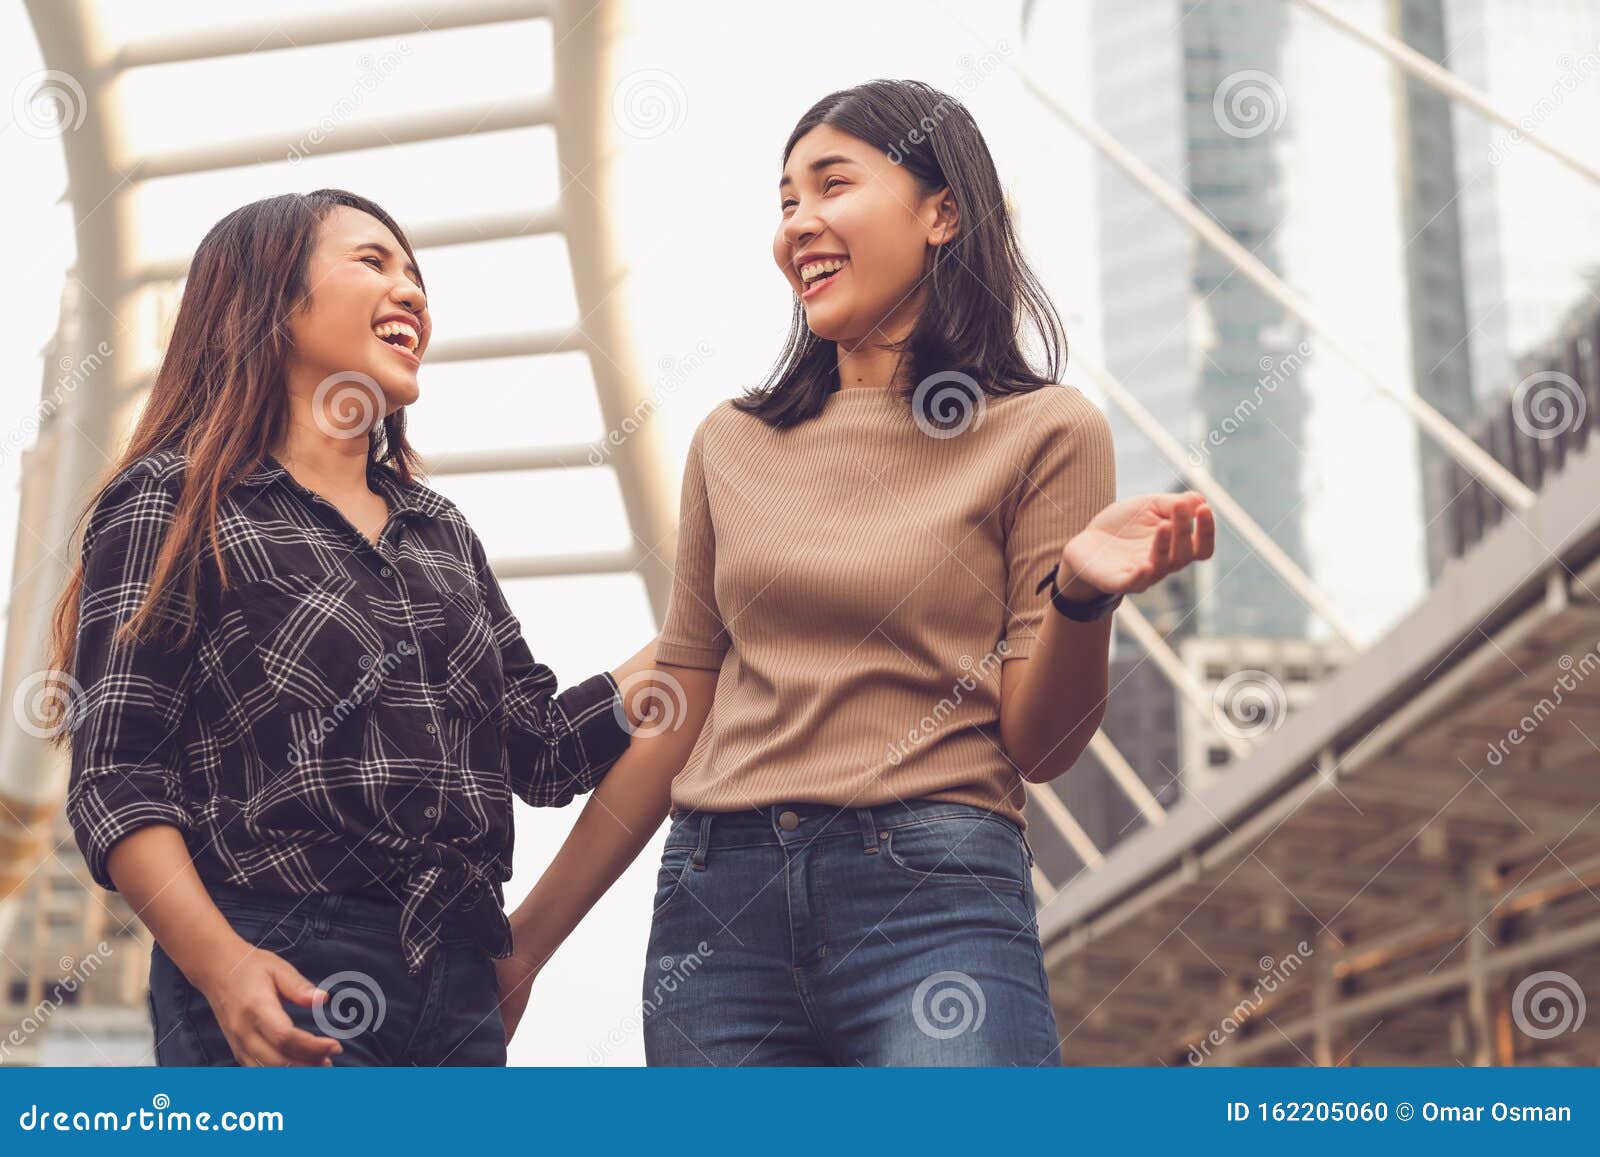 https://thumbs.dreamstime.com/z/multicultural-asian-girlfriends-having-social-time-together-city-holiday-vacation-best-friends-socialising-multicultural-162205060.jpg